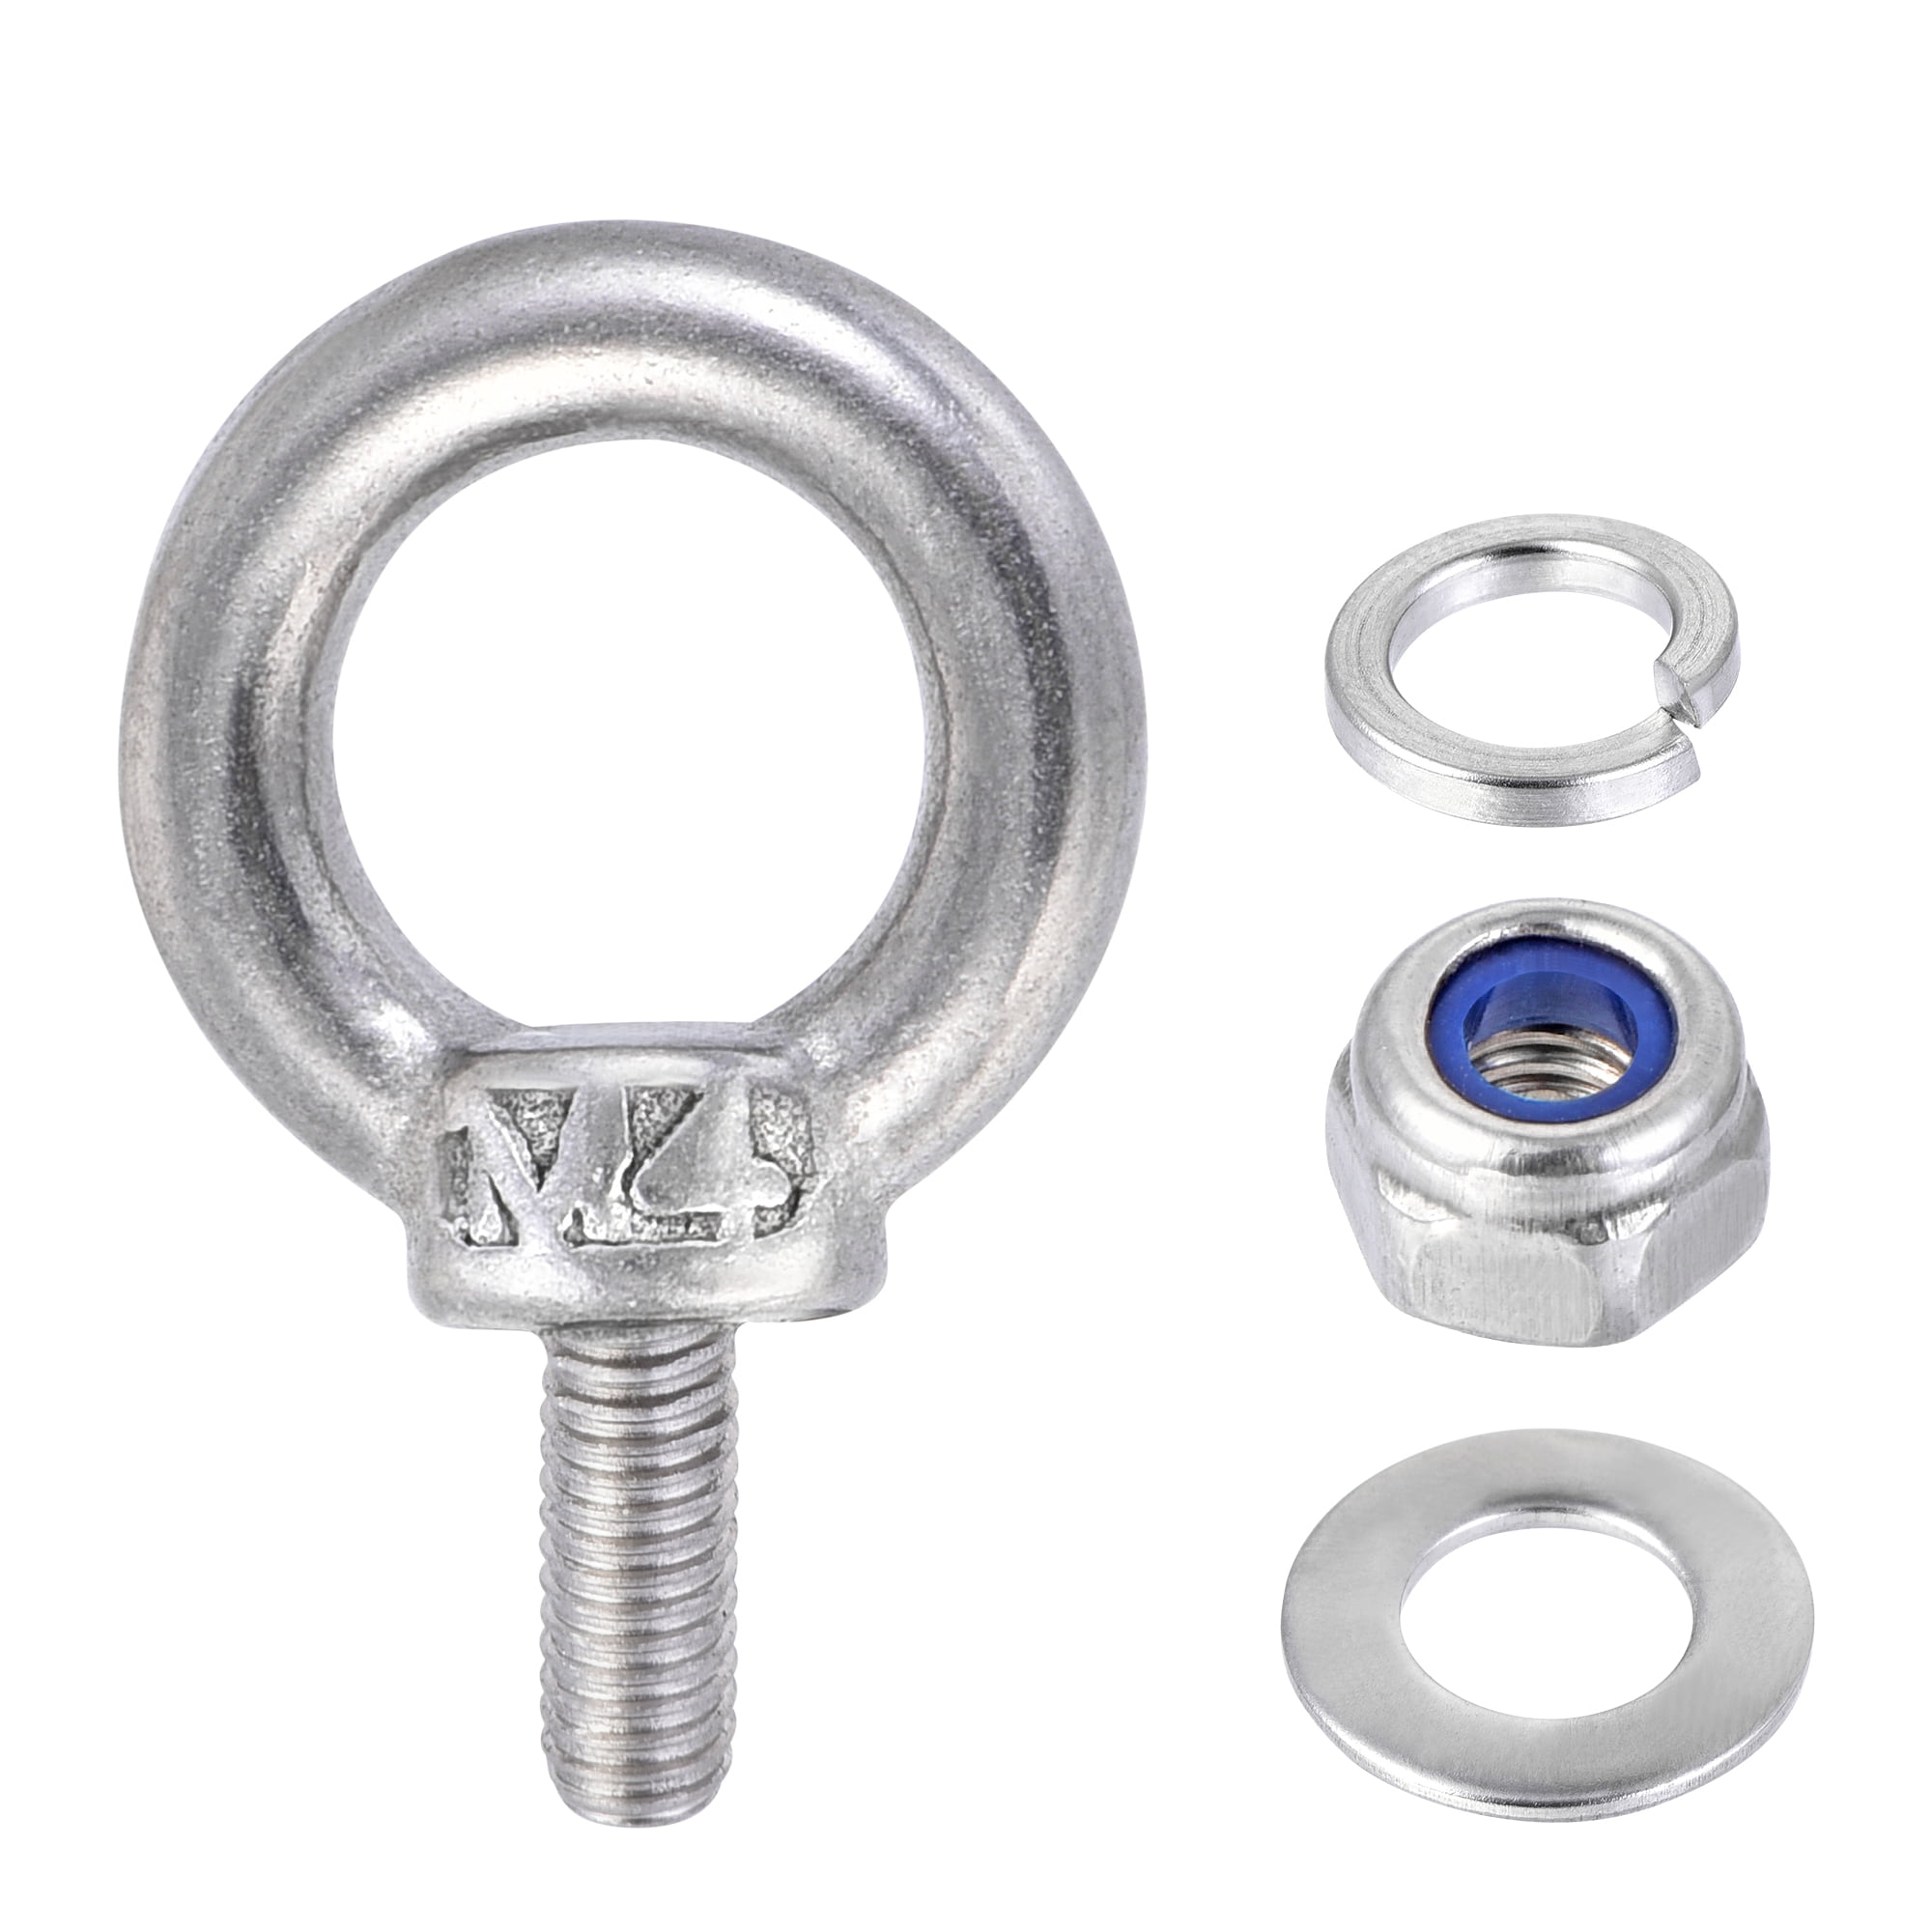 Lifting Eye Bolt M4 x 11mm Male with Hex Screw Nut Gasket Flat Washer 6 Sets 